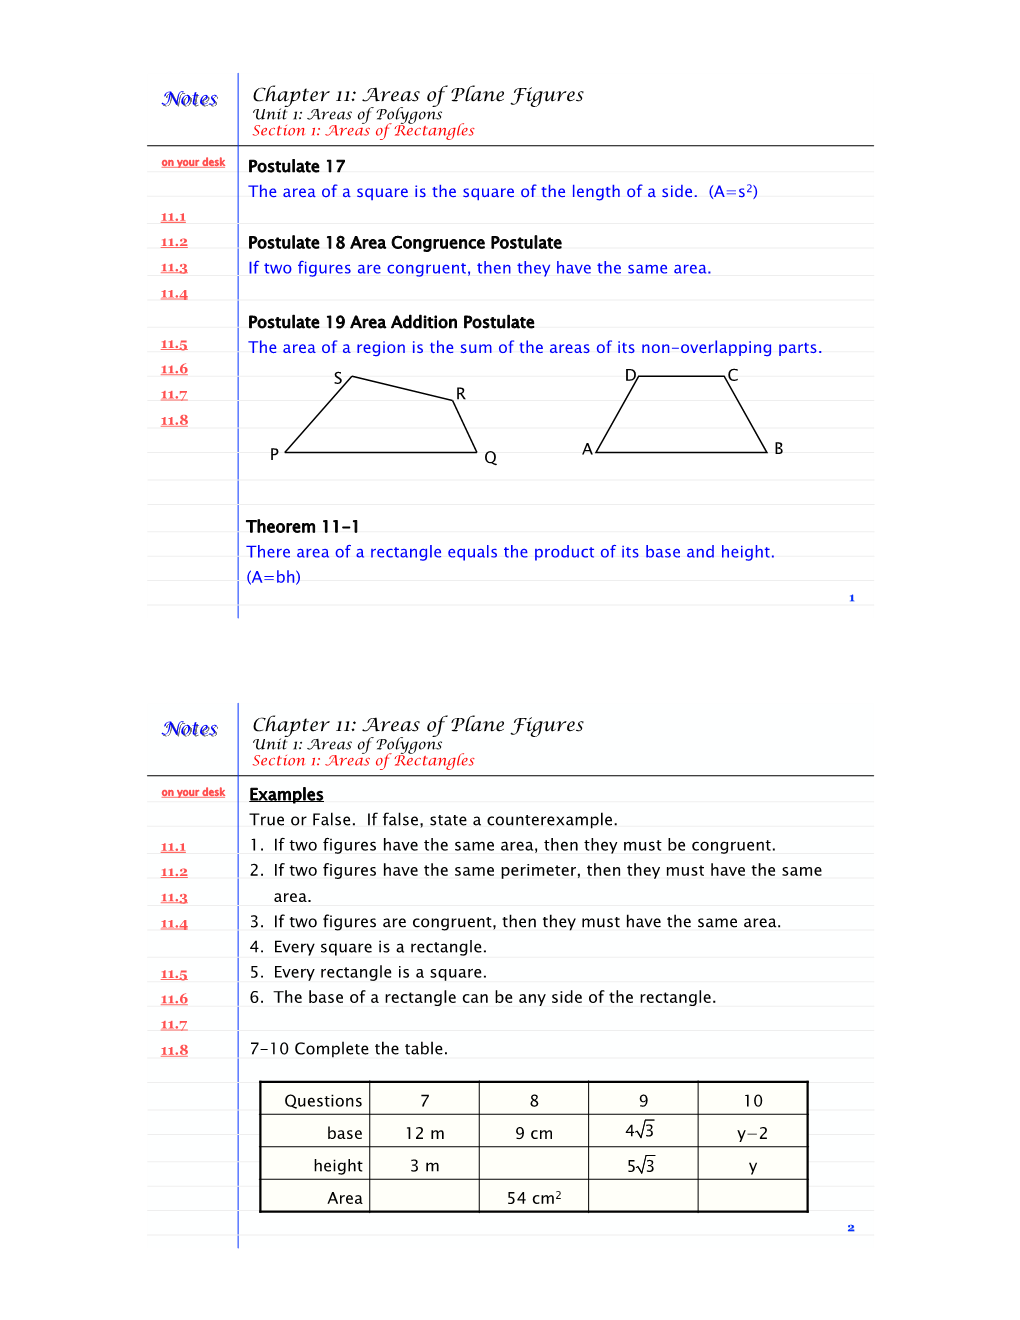 NOTES Geom Chap 11 Areas of Plane Figures